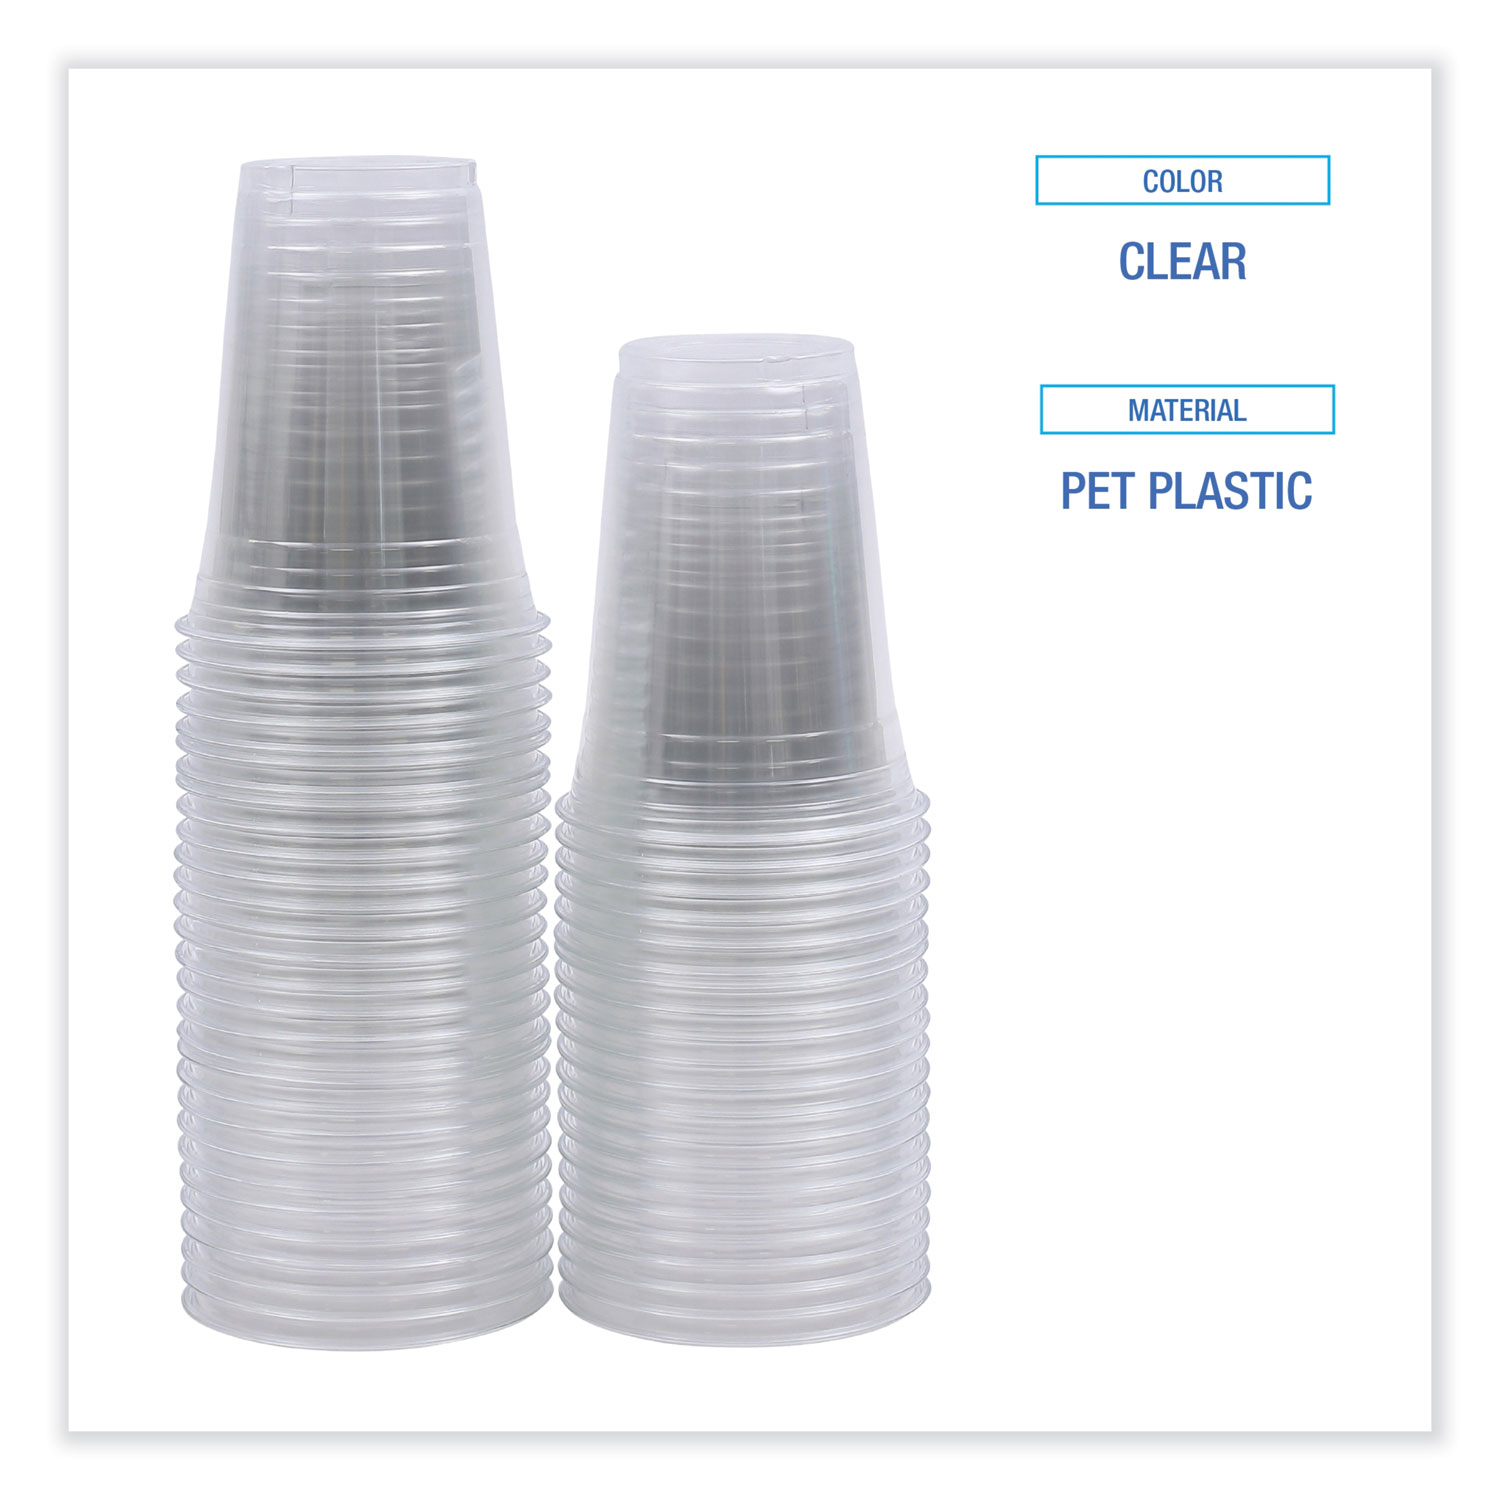 16oz. Clear Plastic Disposable Containers w/ Lids 50ct., Silver